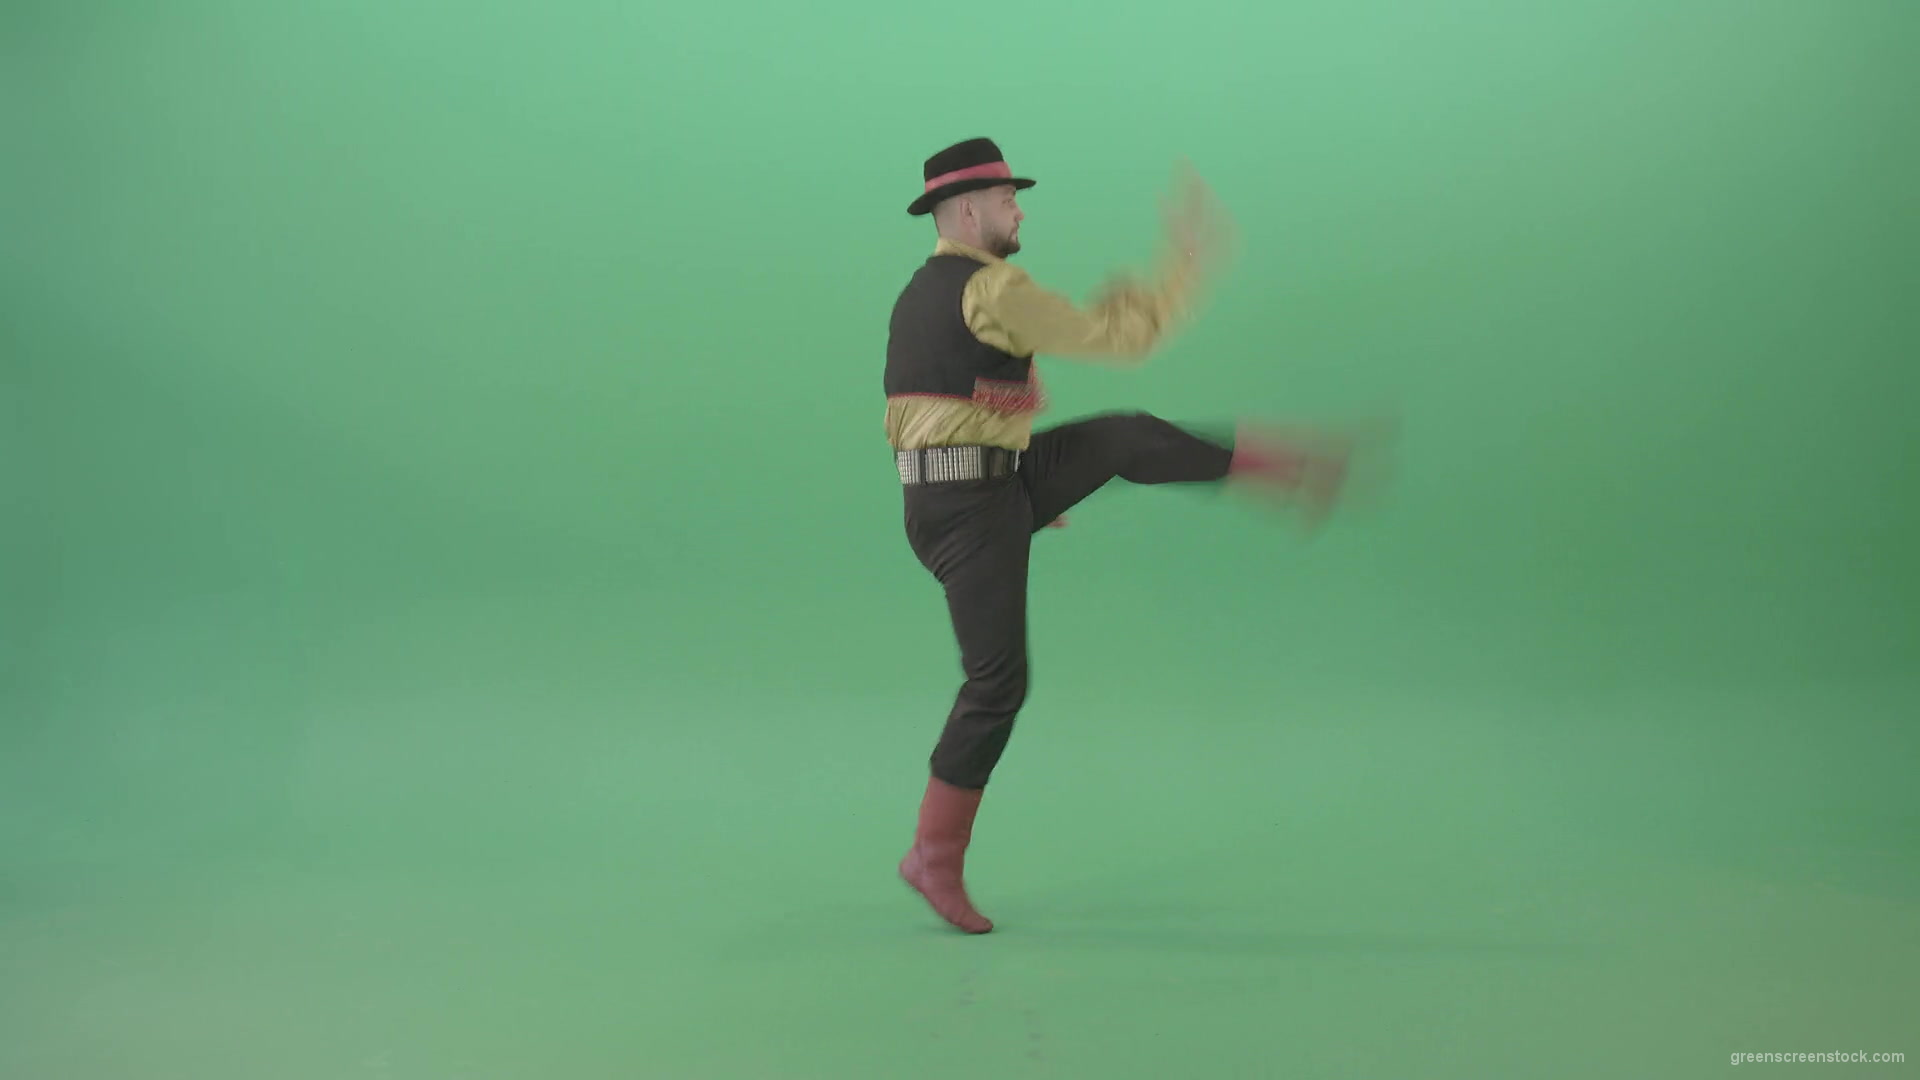 Romanian-Gypsy-Man-dancing-with-clapping-hand-with-side-view-isolated-4K-Green-Screen-Video-Footage-1920_005 Green Screen Stock